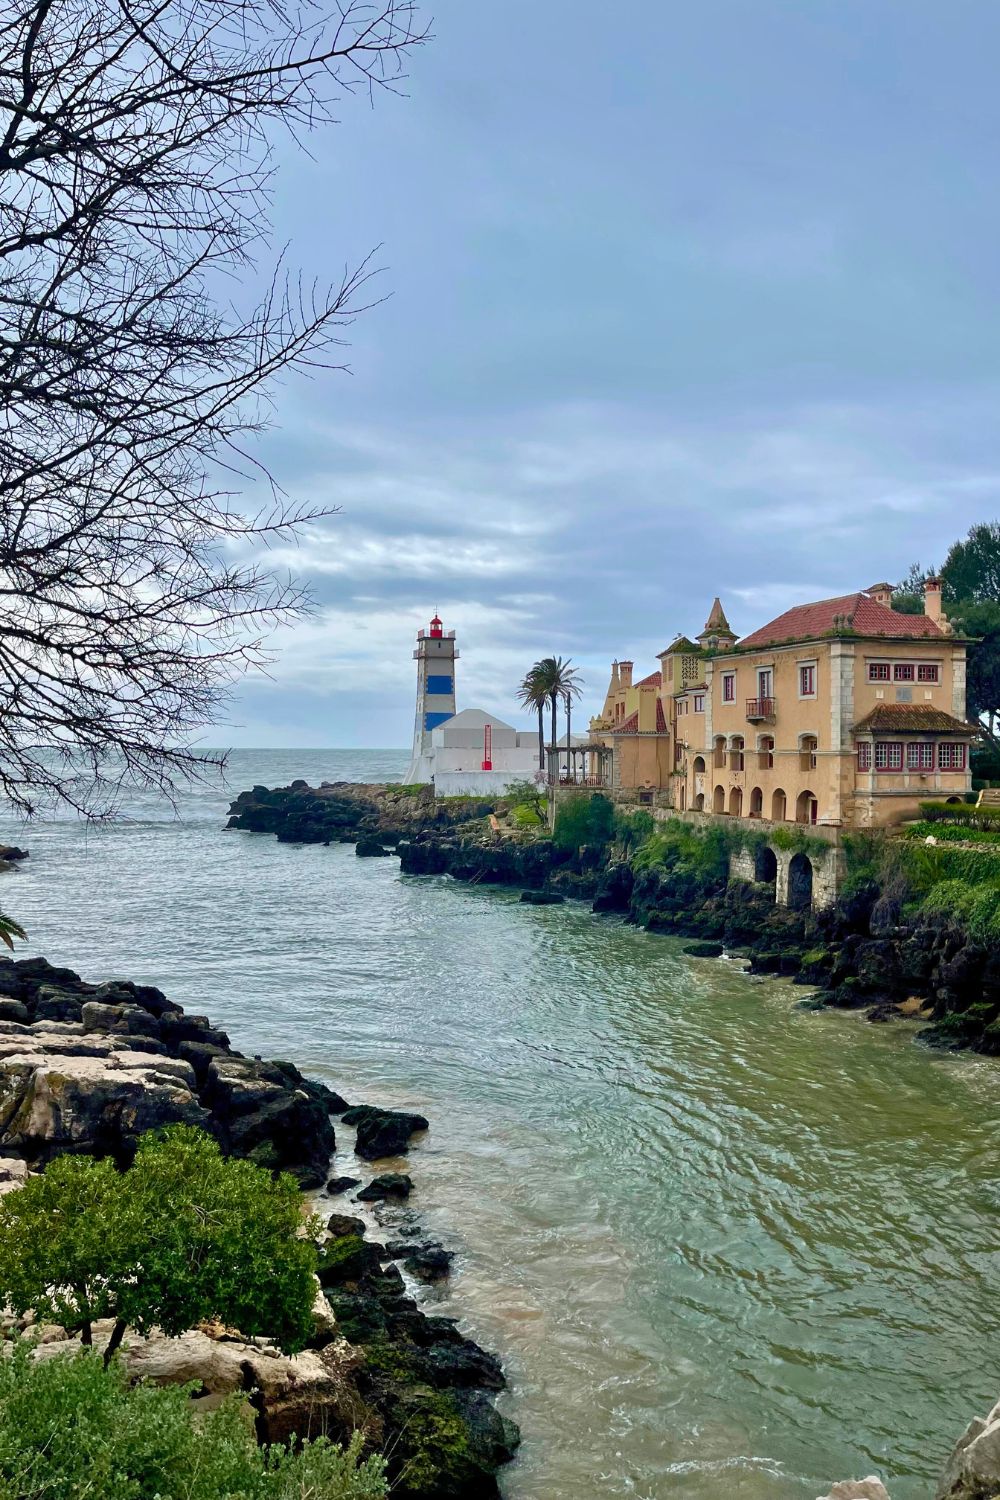 A serene scene at the Santa Marta Lighthouse in Cascais, Portugal, with a view of the beacon overlooking a calm sea beside a historic building, framed by bare branches against an overcast sky.